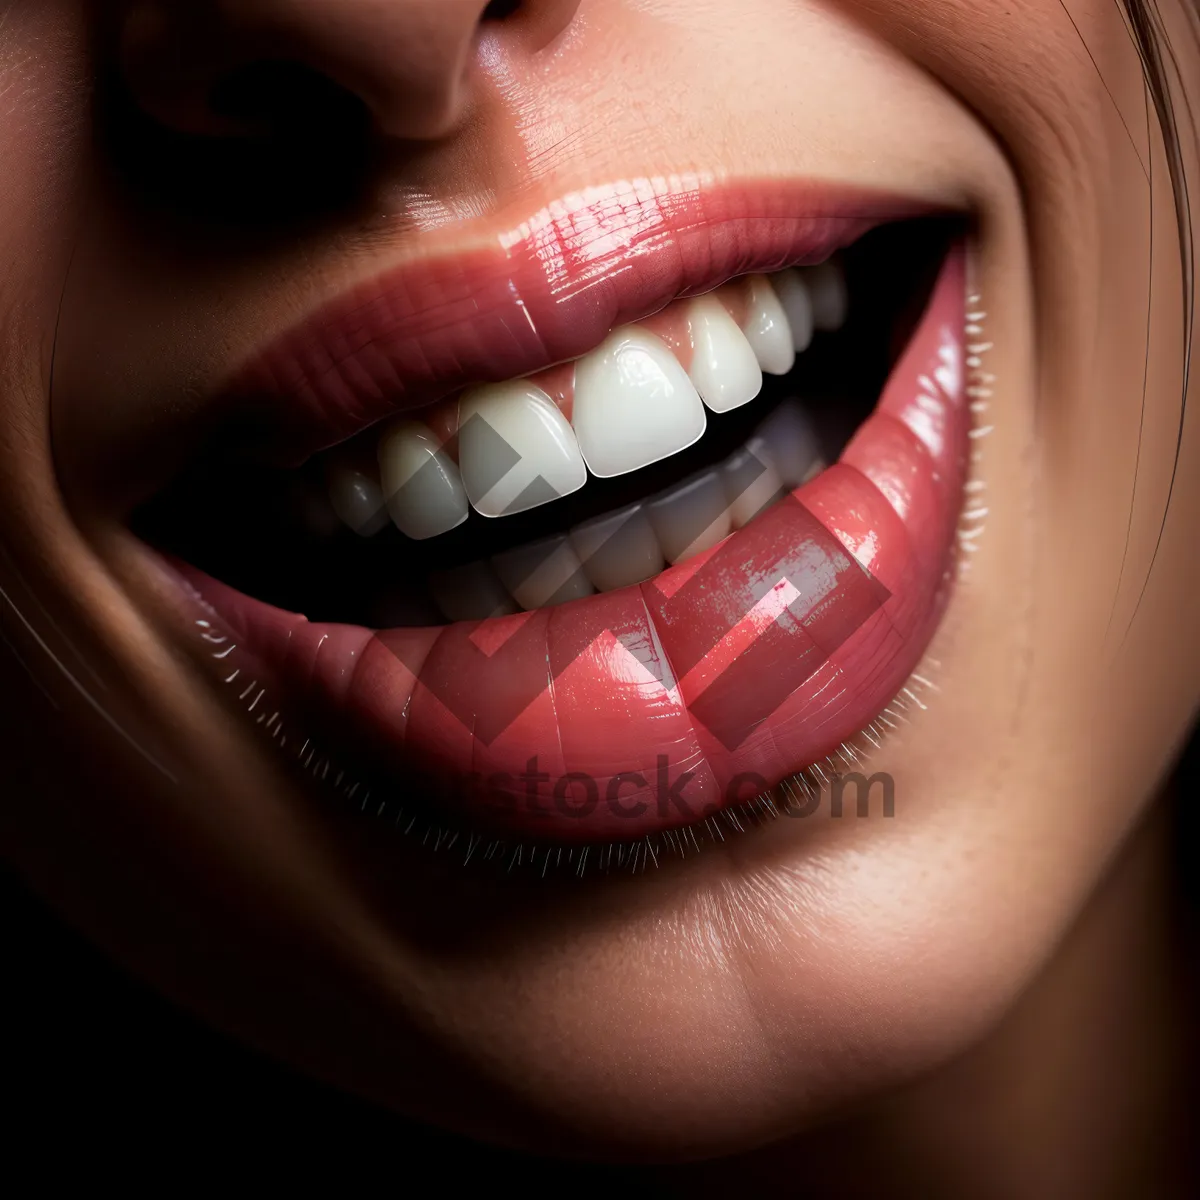 Picture of Smiling Lipstick Model with Braces: Attractive Makeup Look